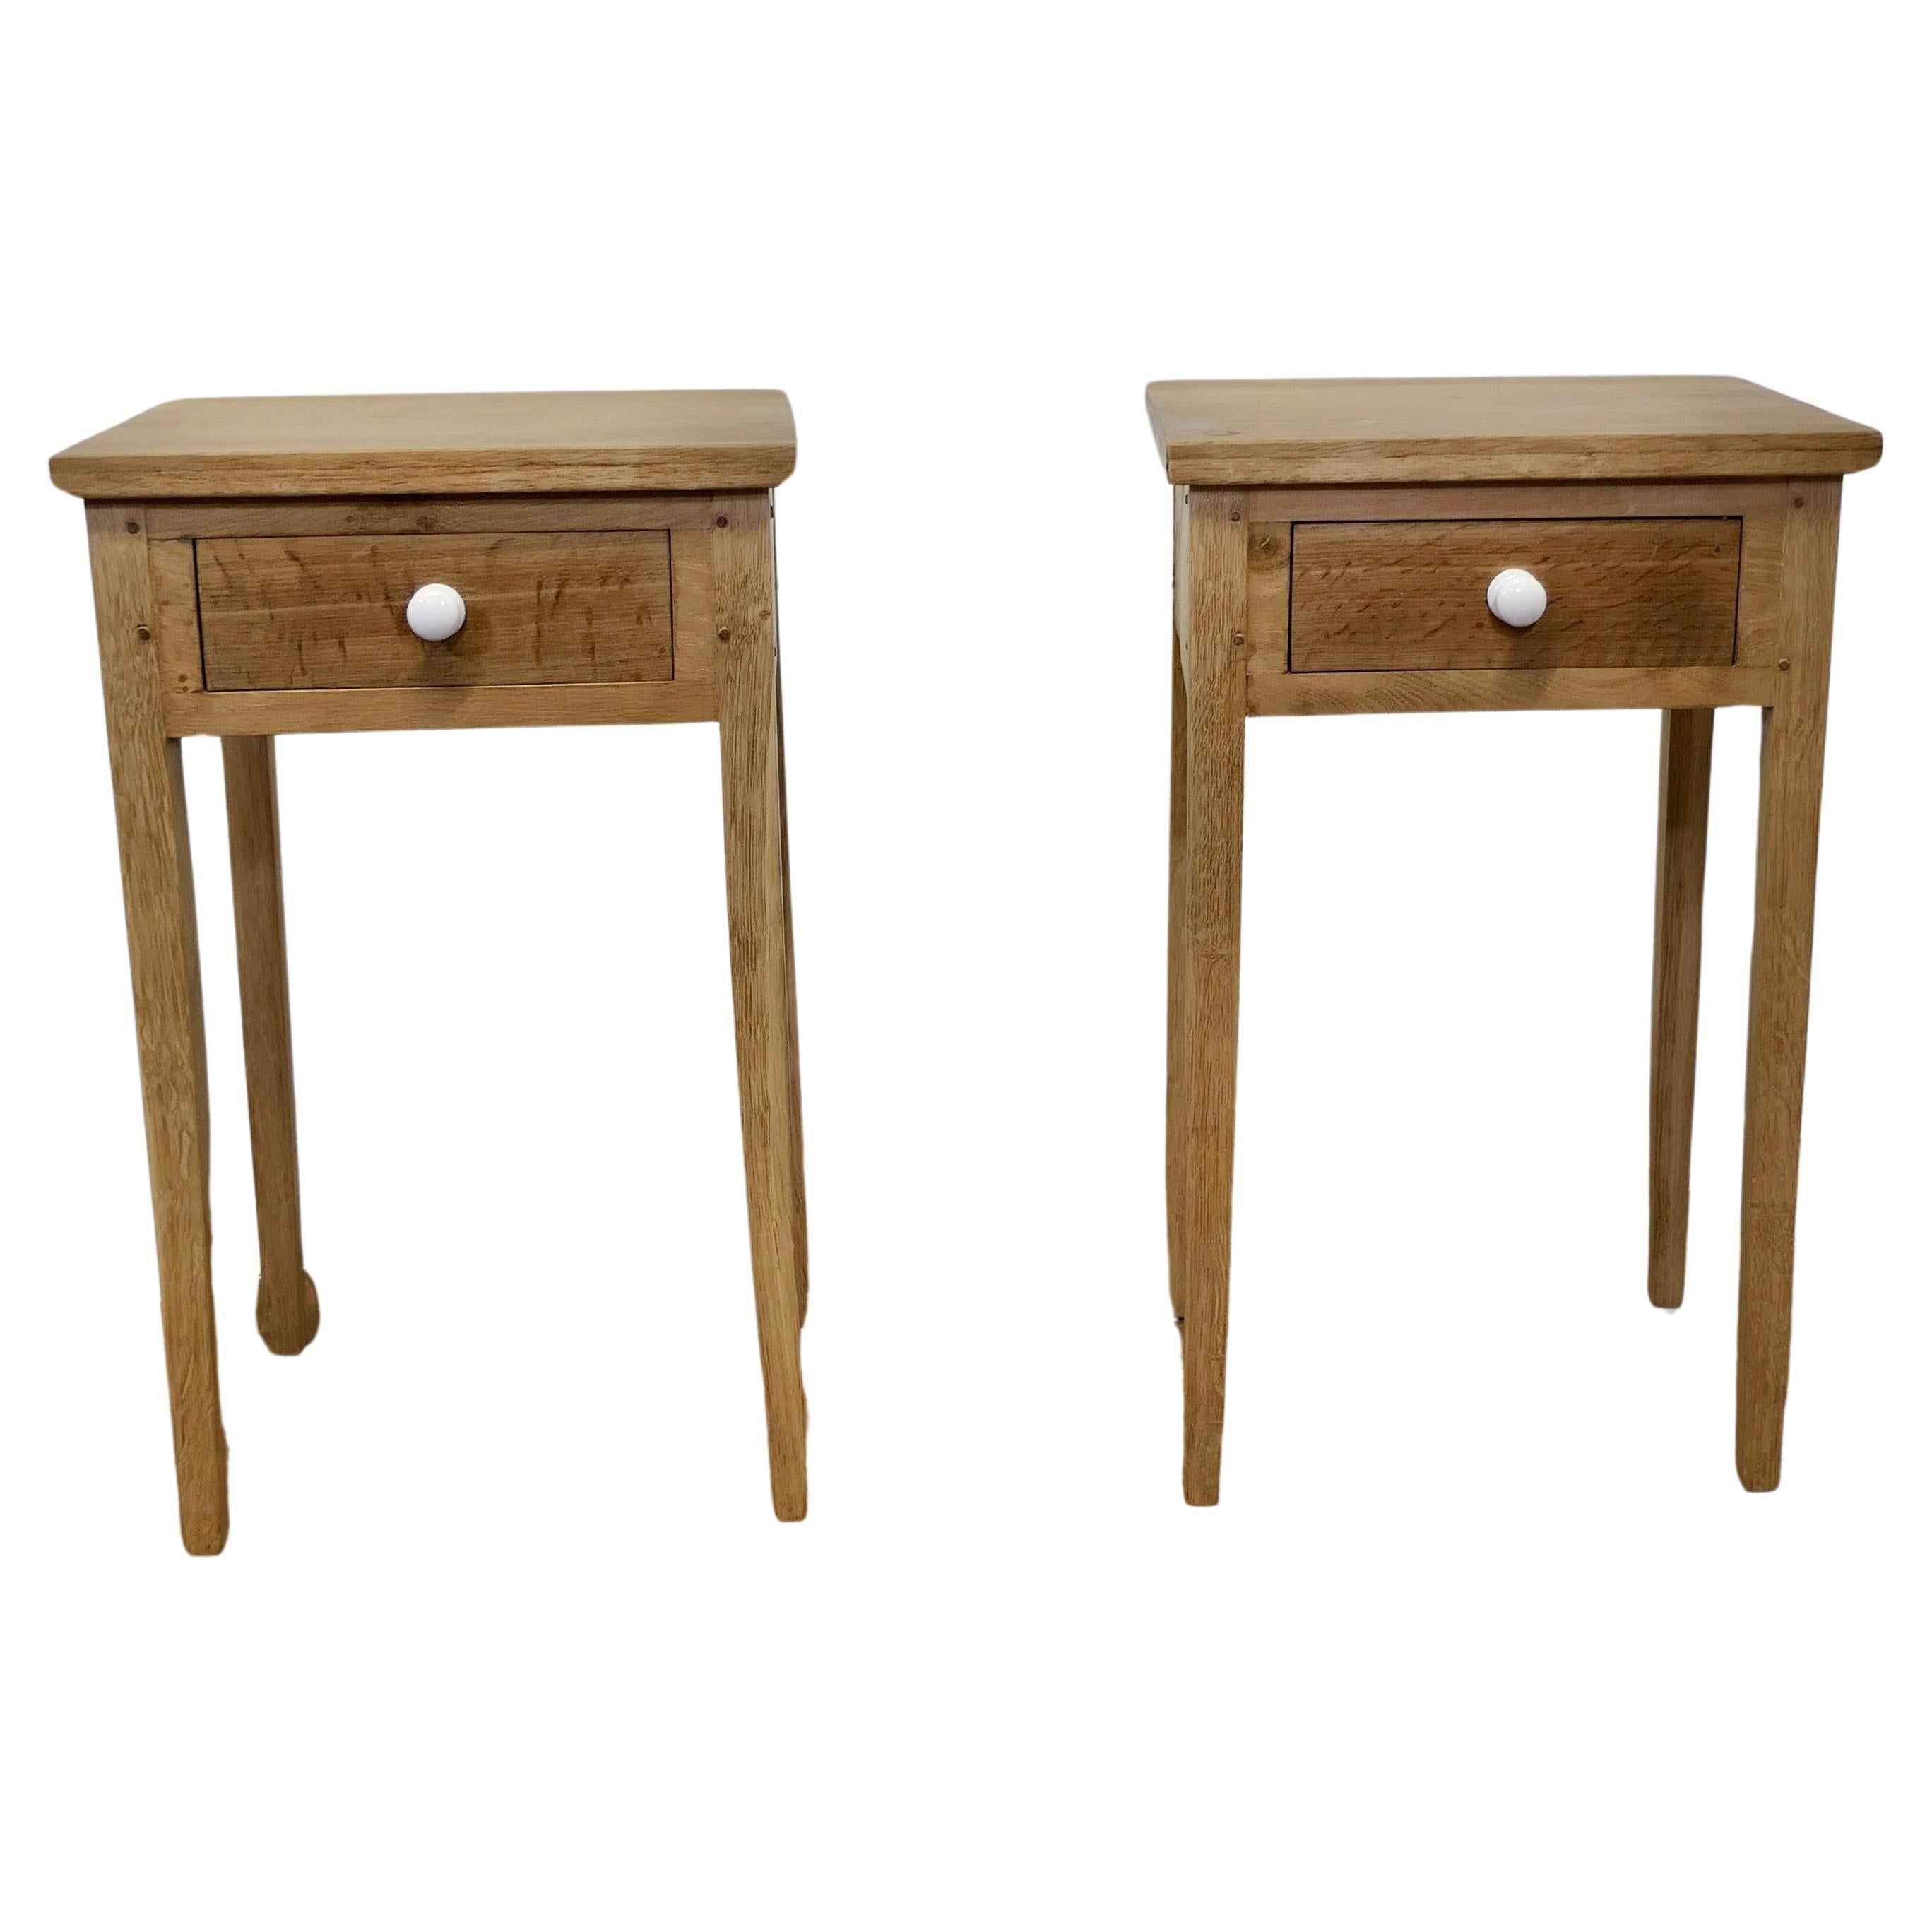  Pair of Bleached Oak Mid Century Bedside Tables 